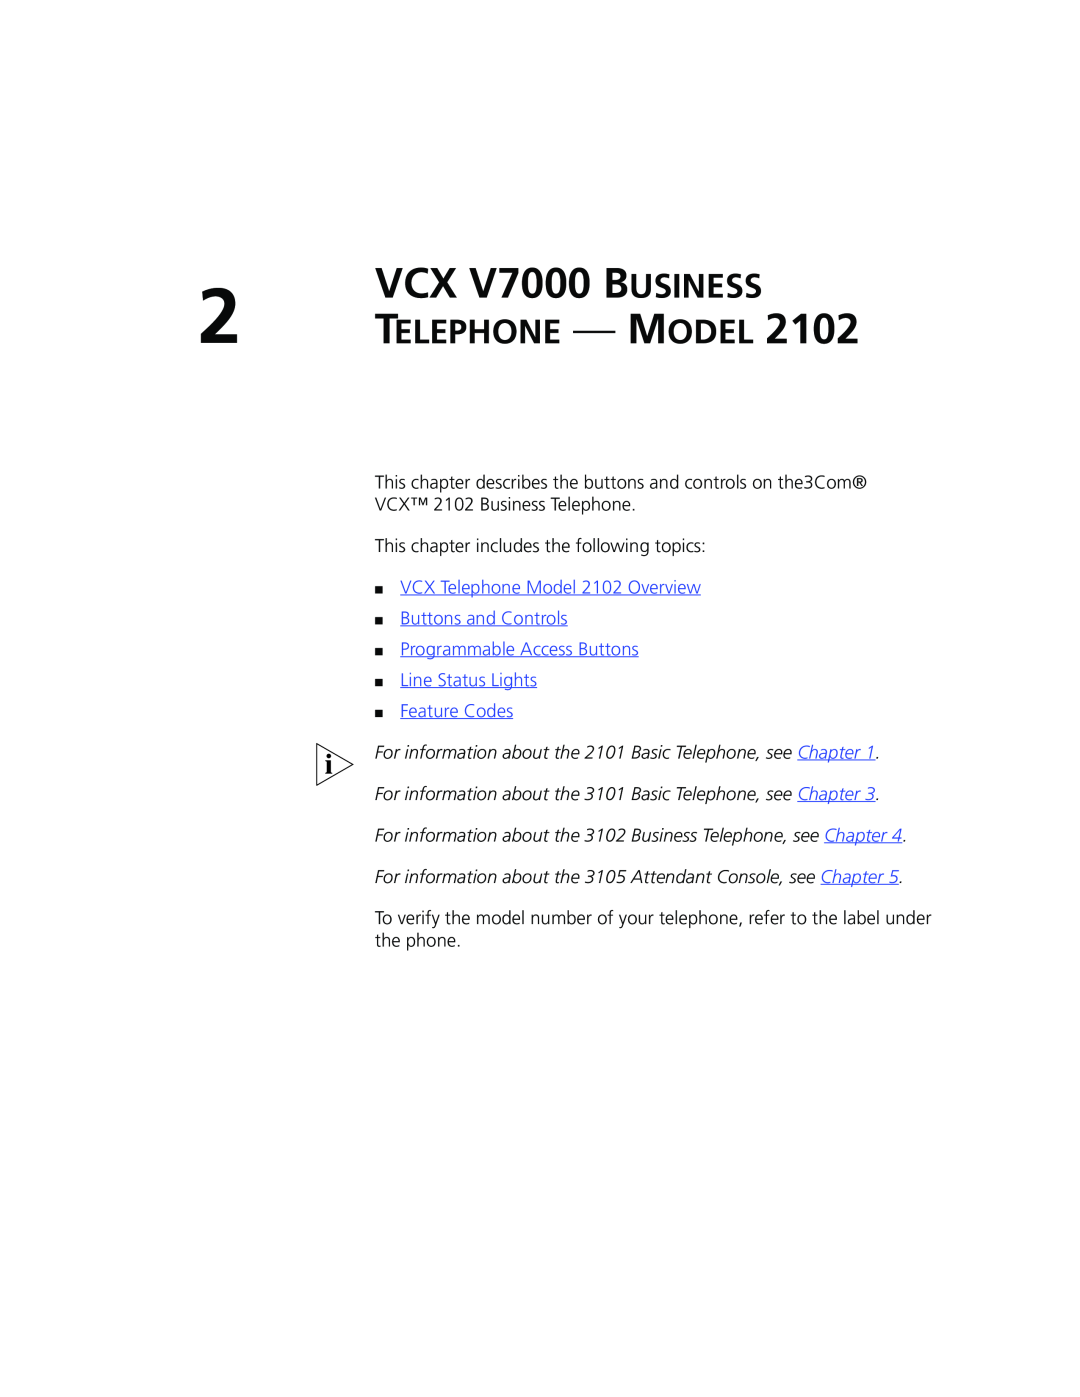 3Com manual Telephone - Model, VCX Telephone Model 2102 Overview Buttons and Controls, VCX V7000 BUSINESS 